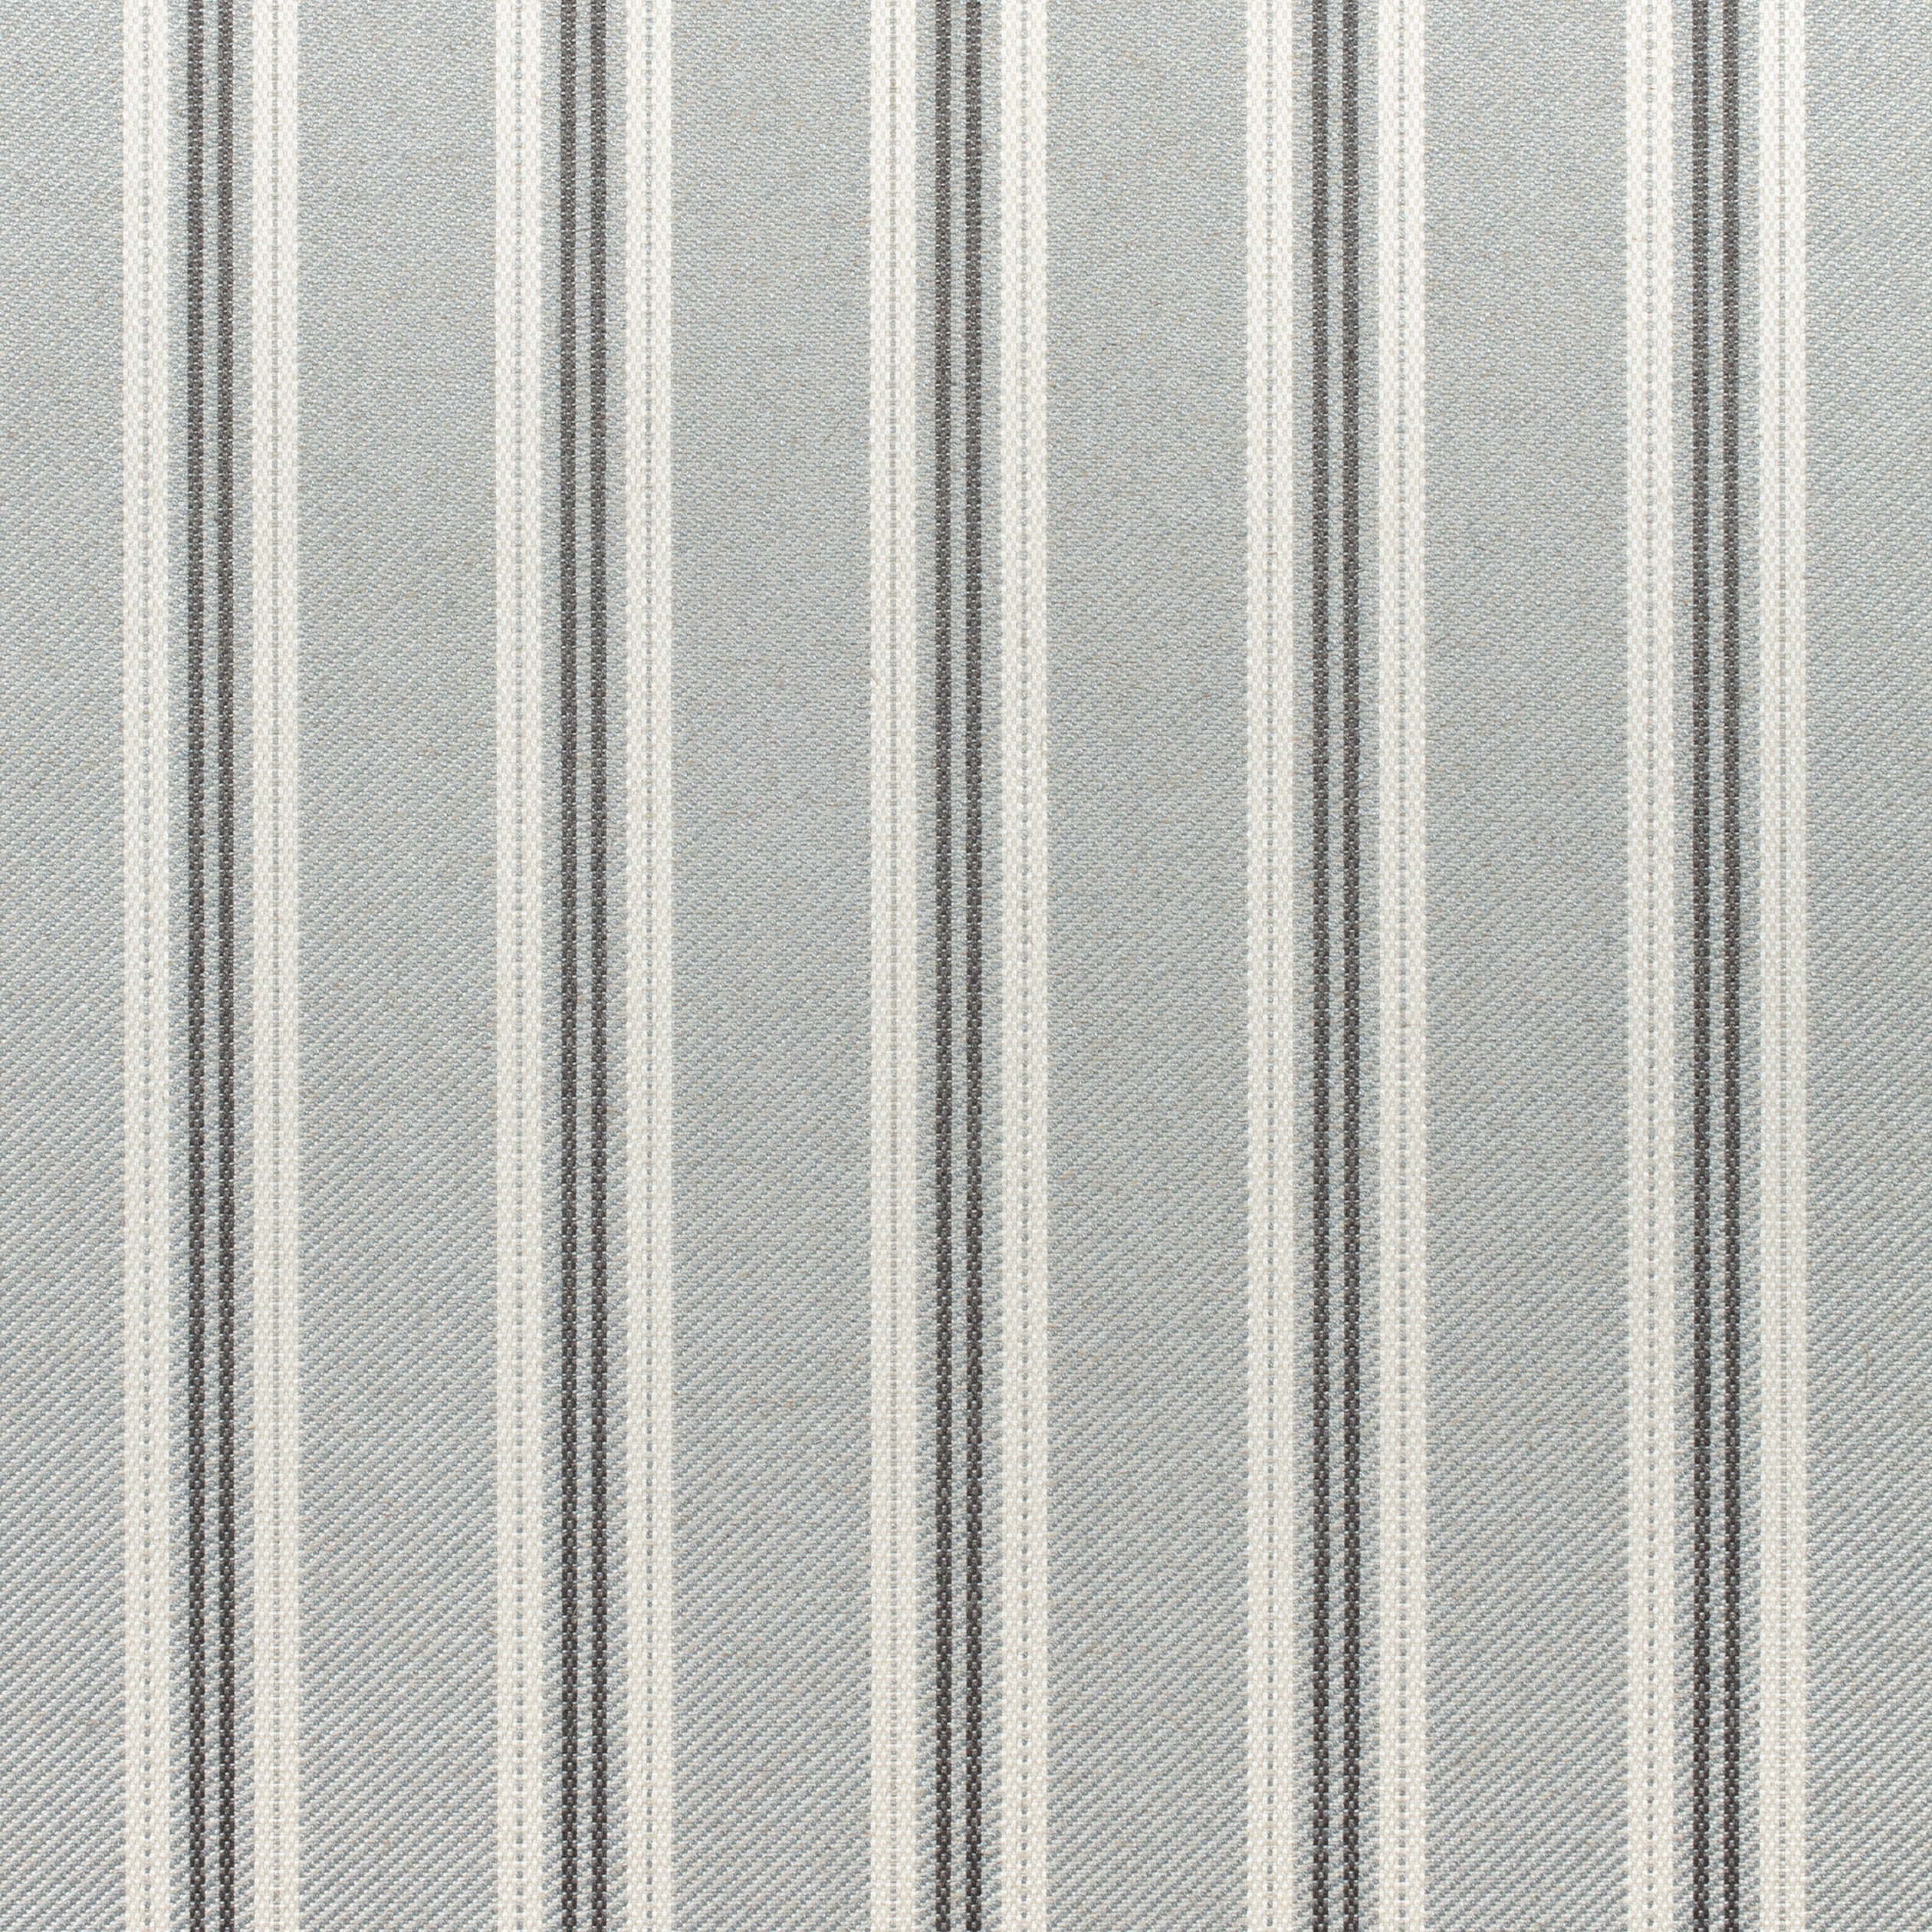 Colonnade Stripe fabric in sterling grey color - pattern number W80737 - by Thibaut in the Woven Resource 11: Rialto collection